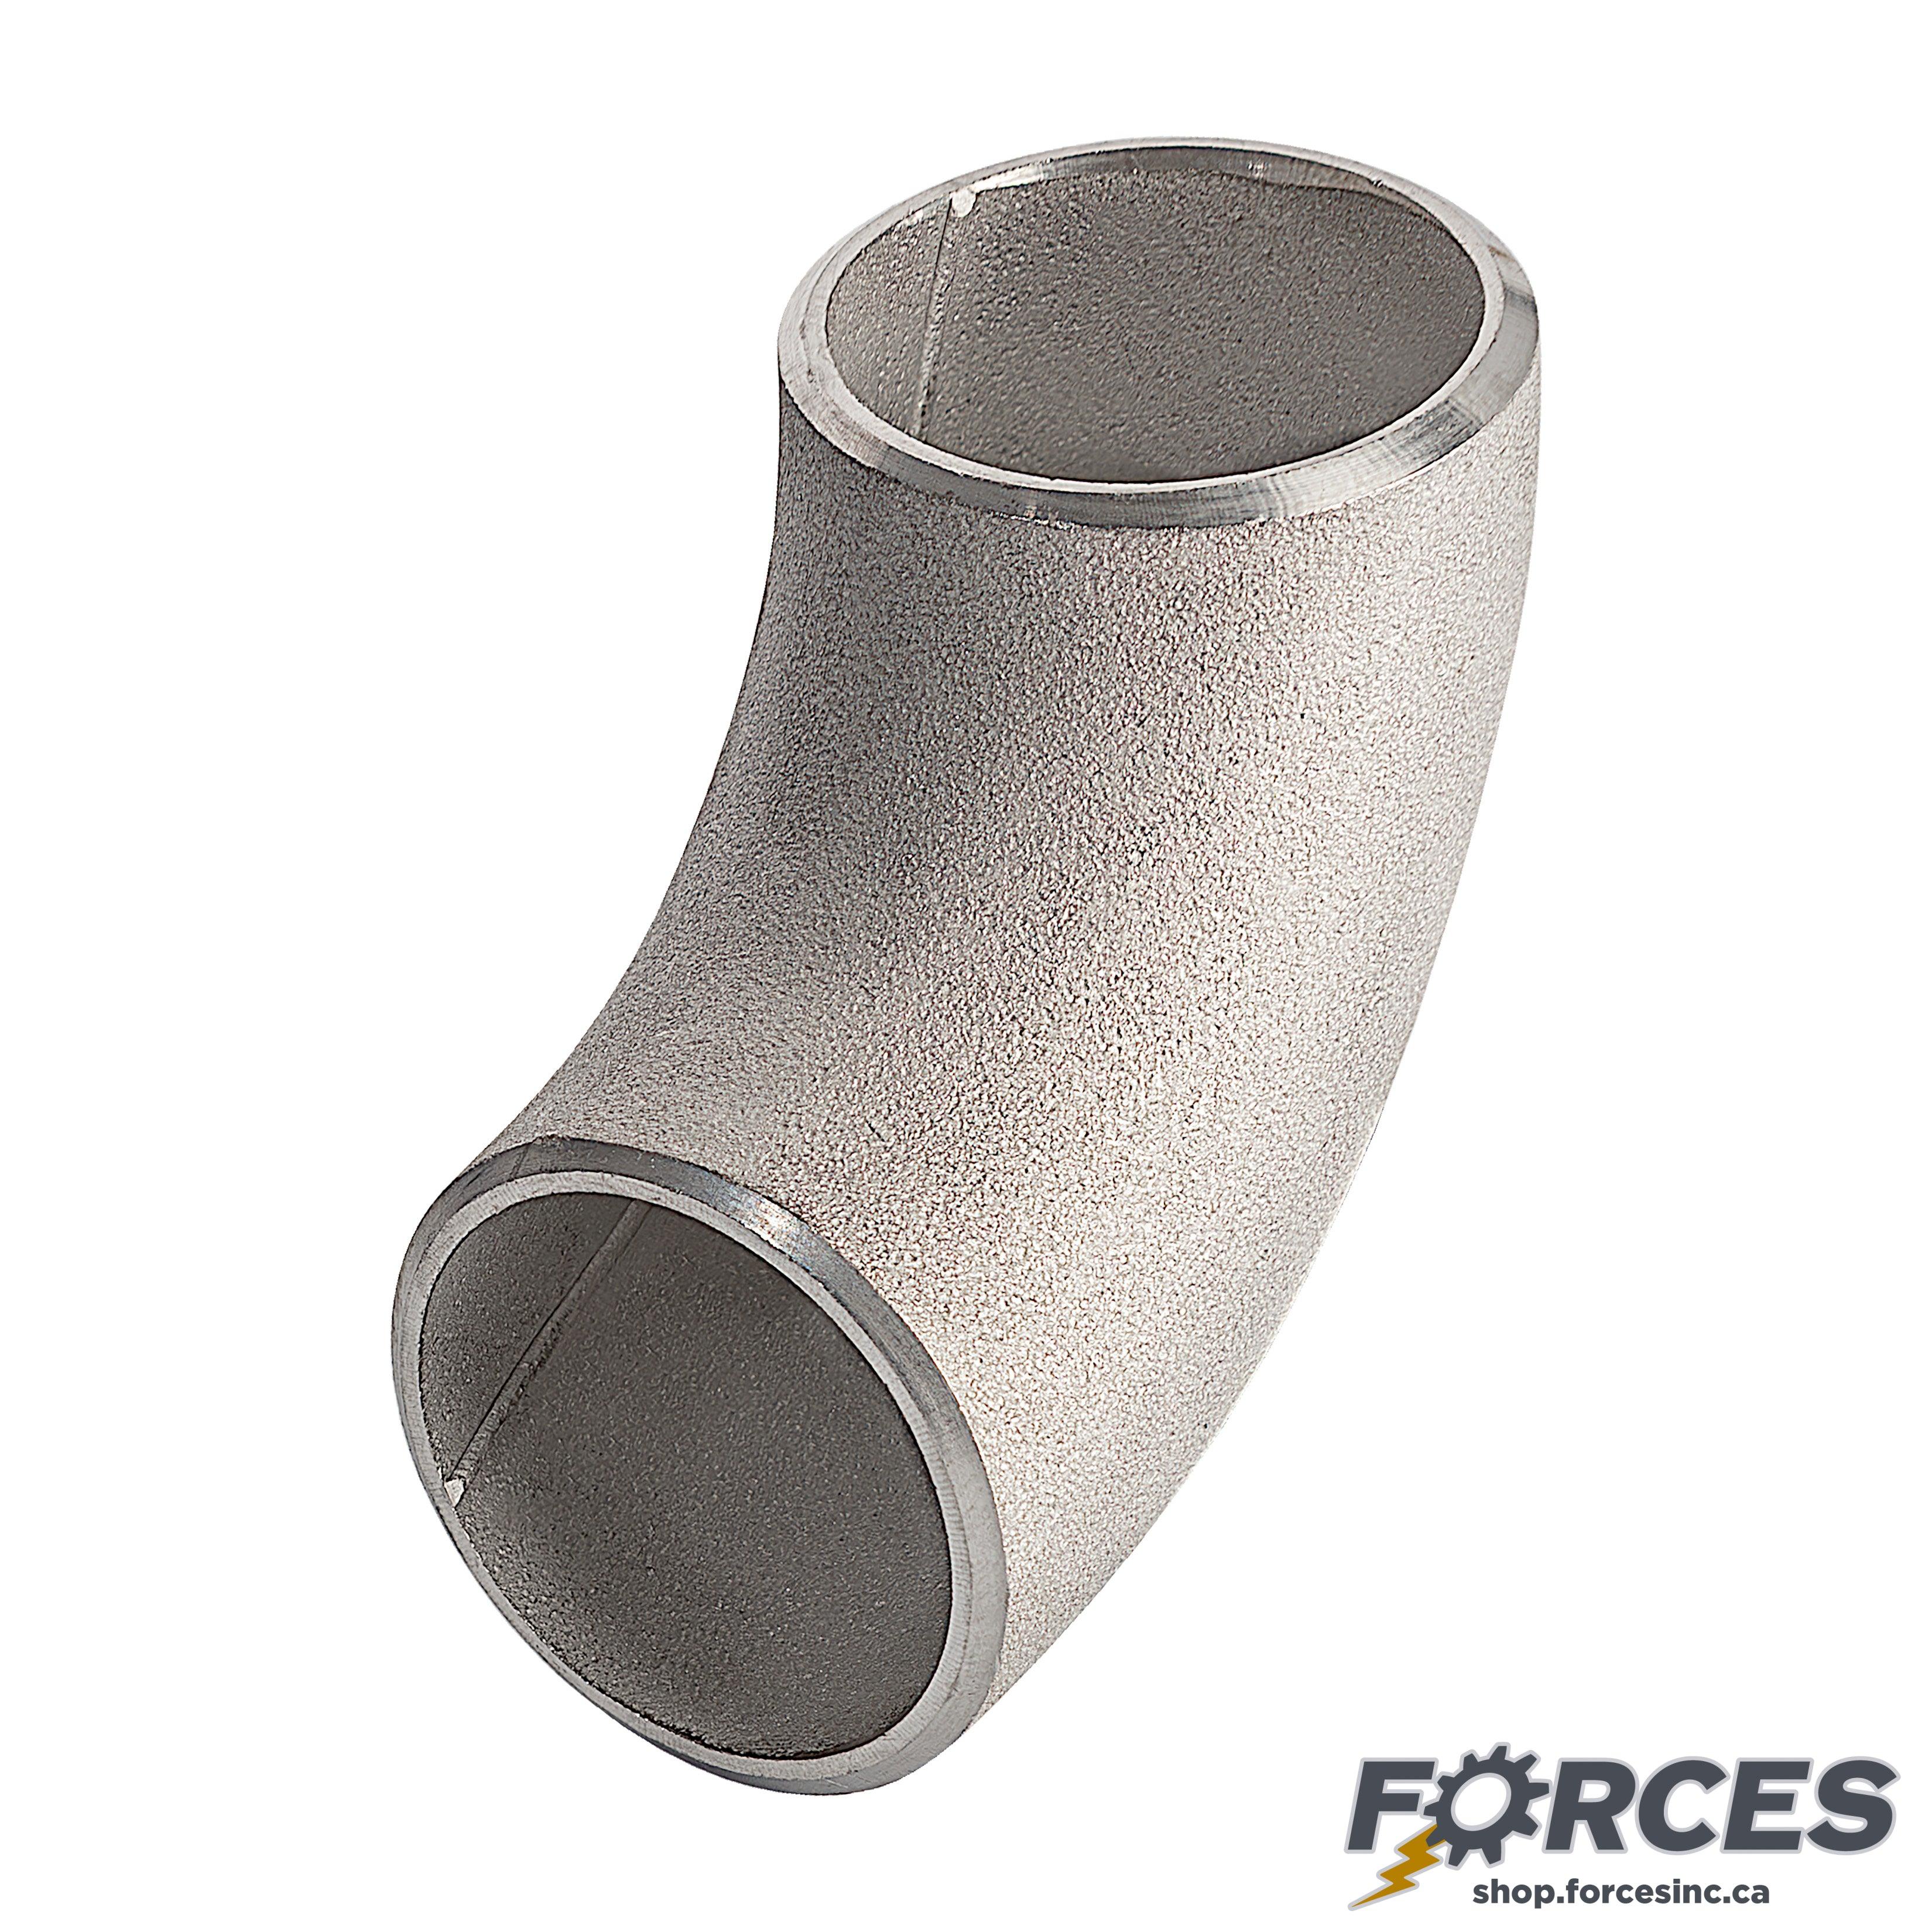 2-1/2" Elbow 90° SCH 40 Butt Weld - Stainless Steel 316 - Forces Inc